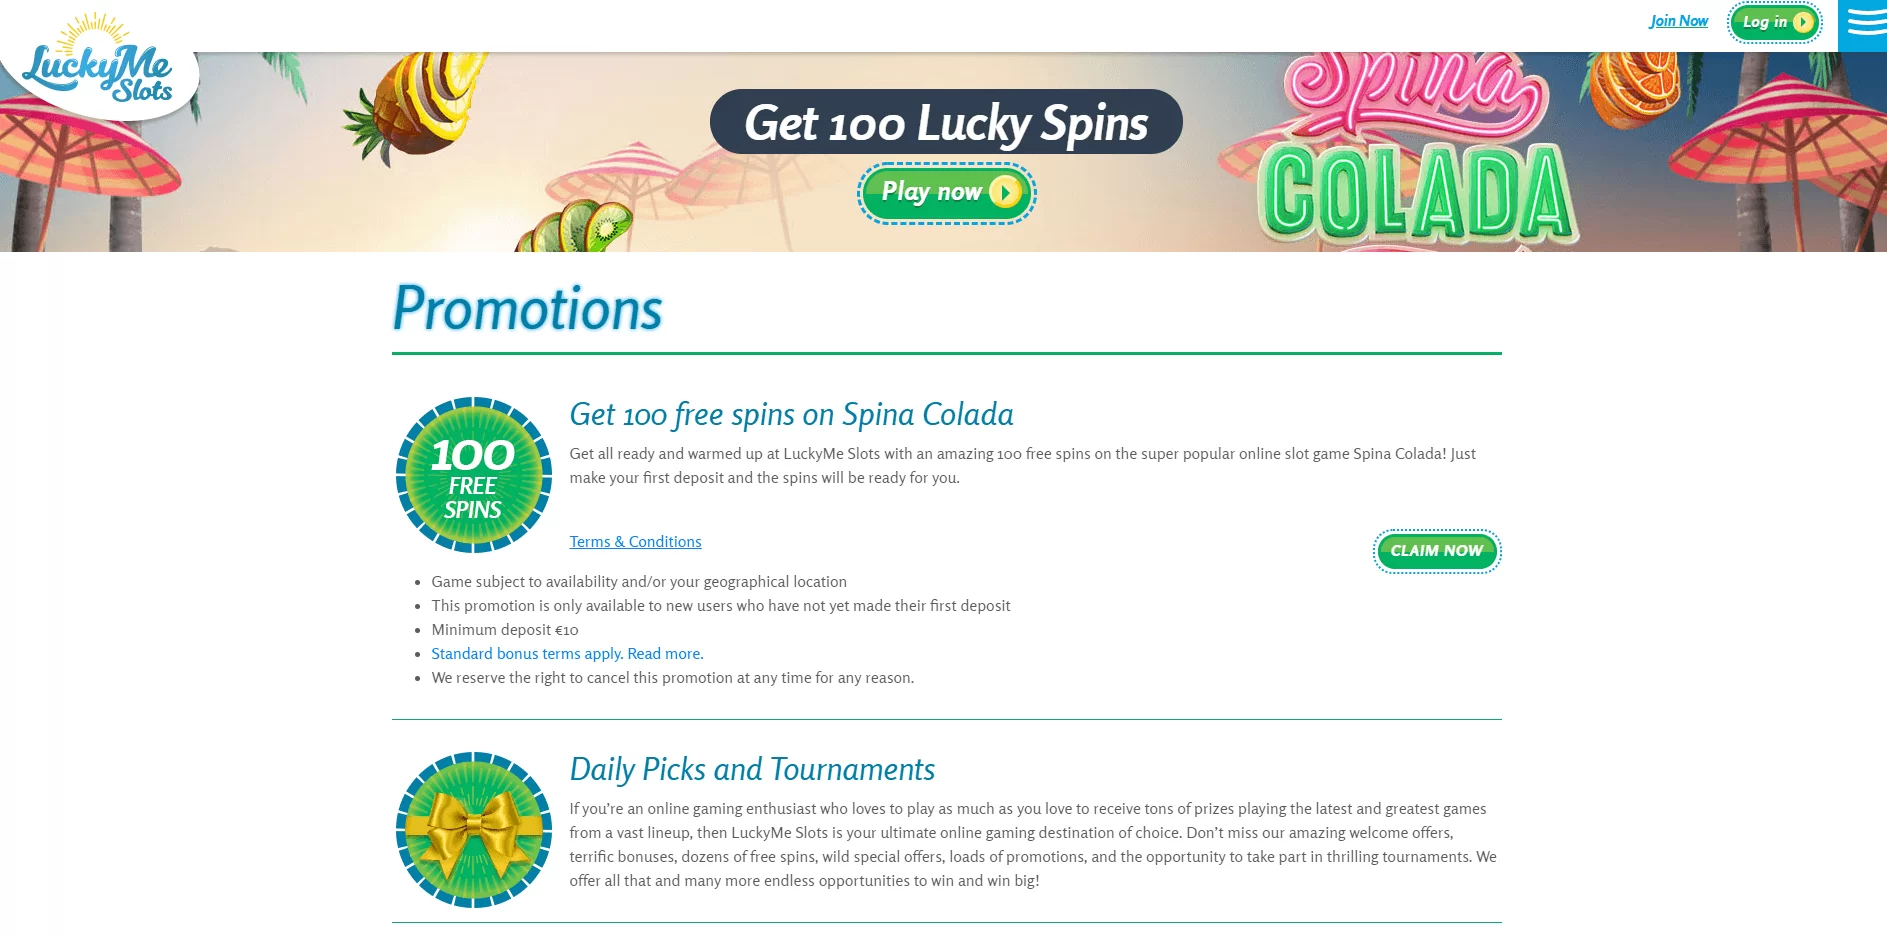 Lucky me slots coupon code free